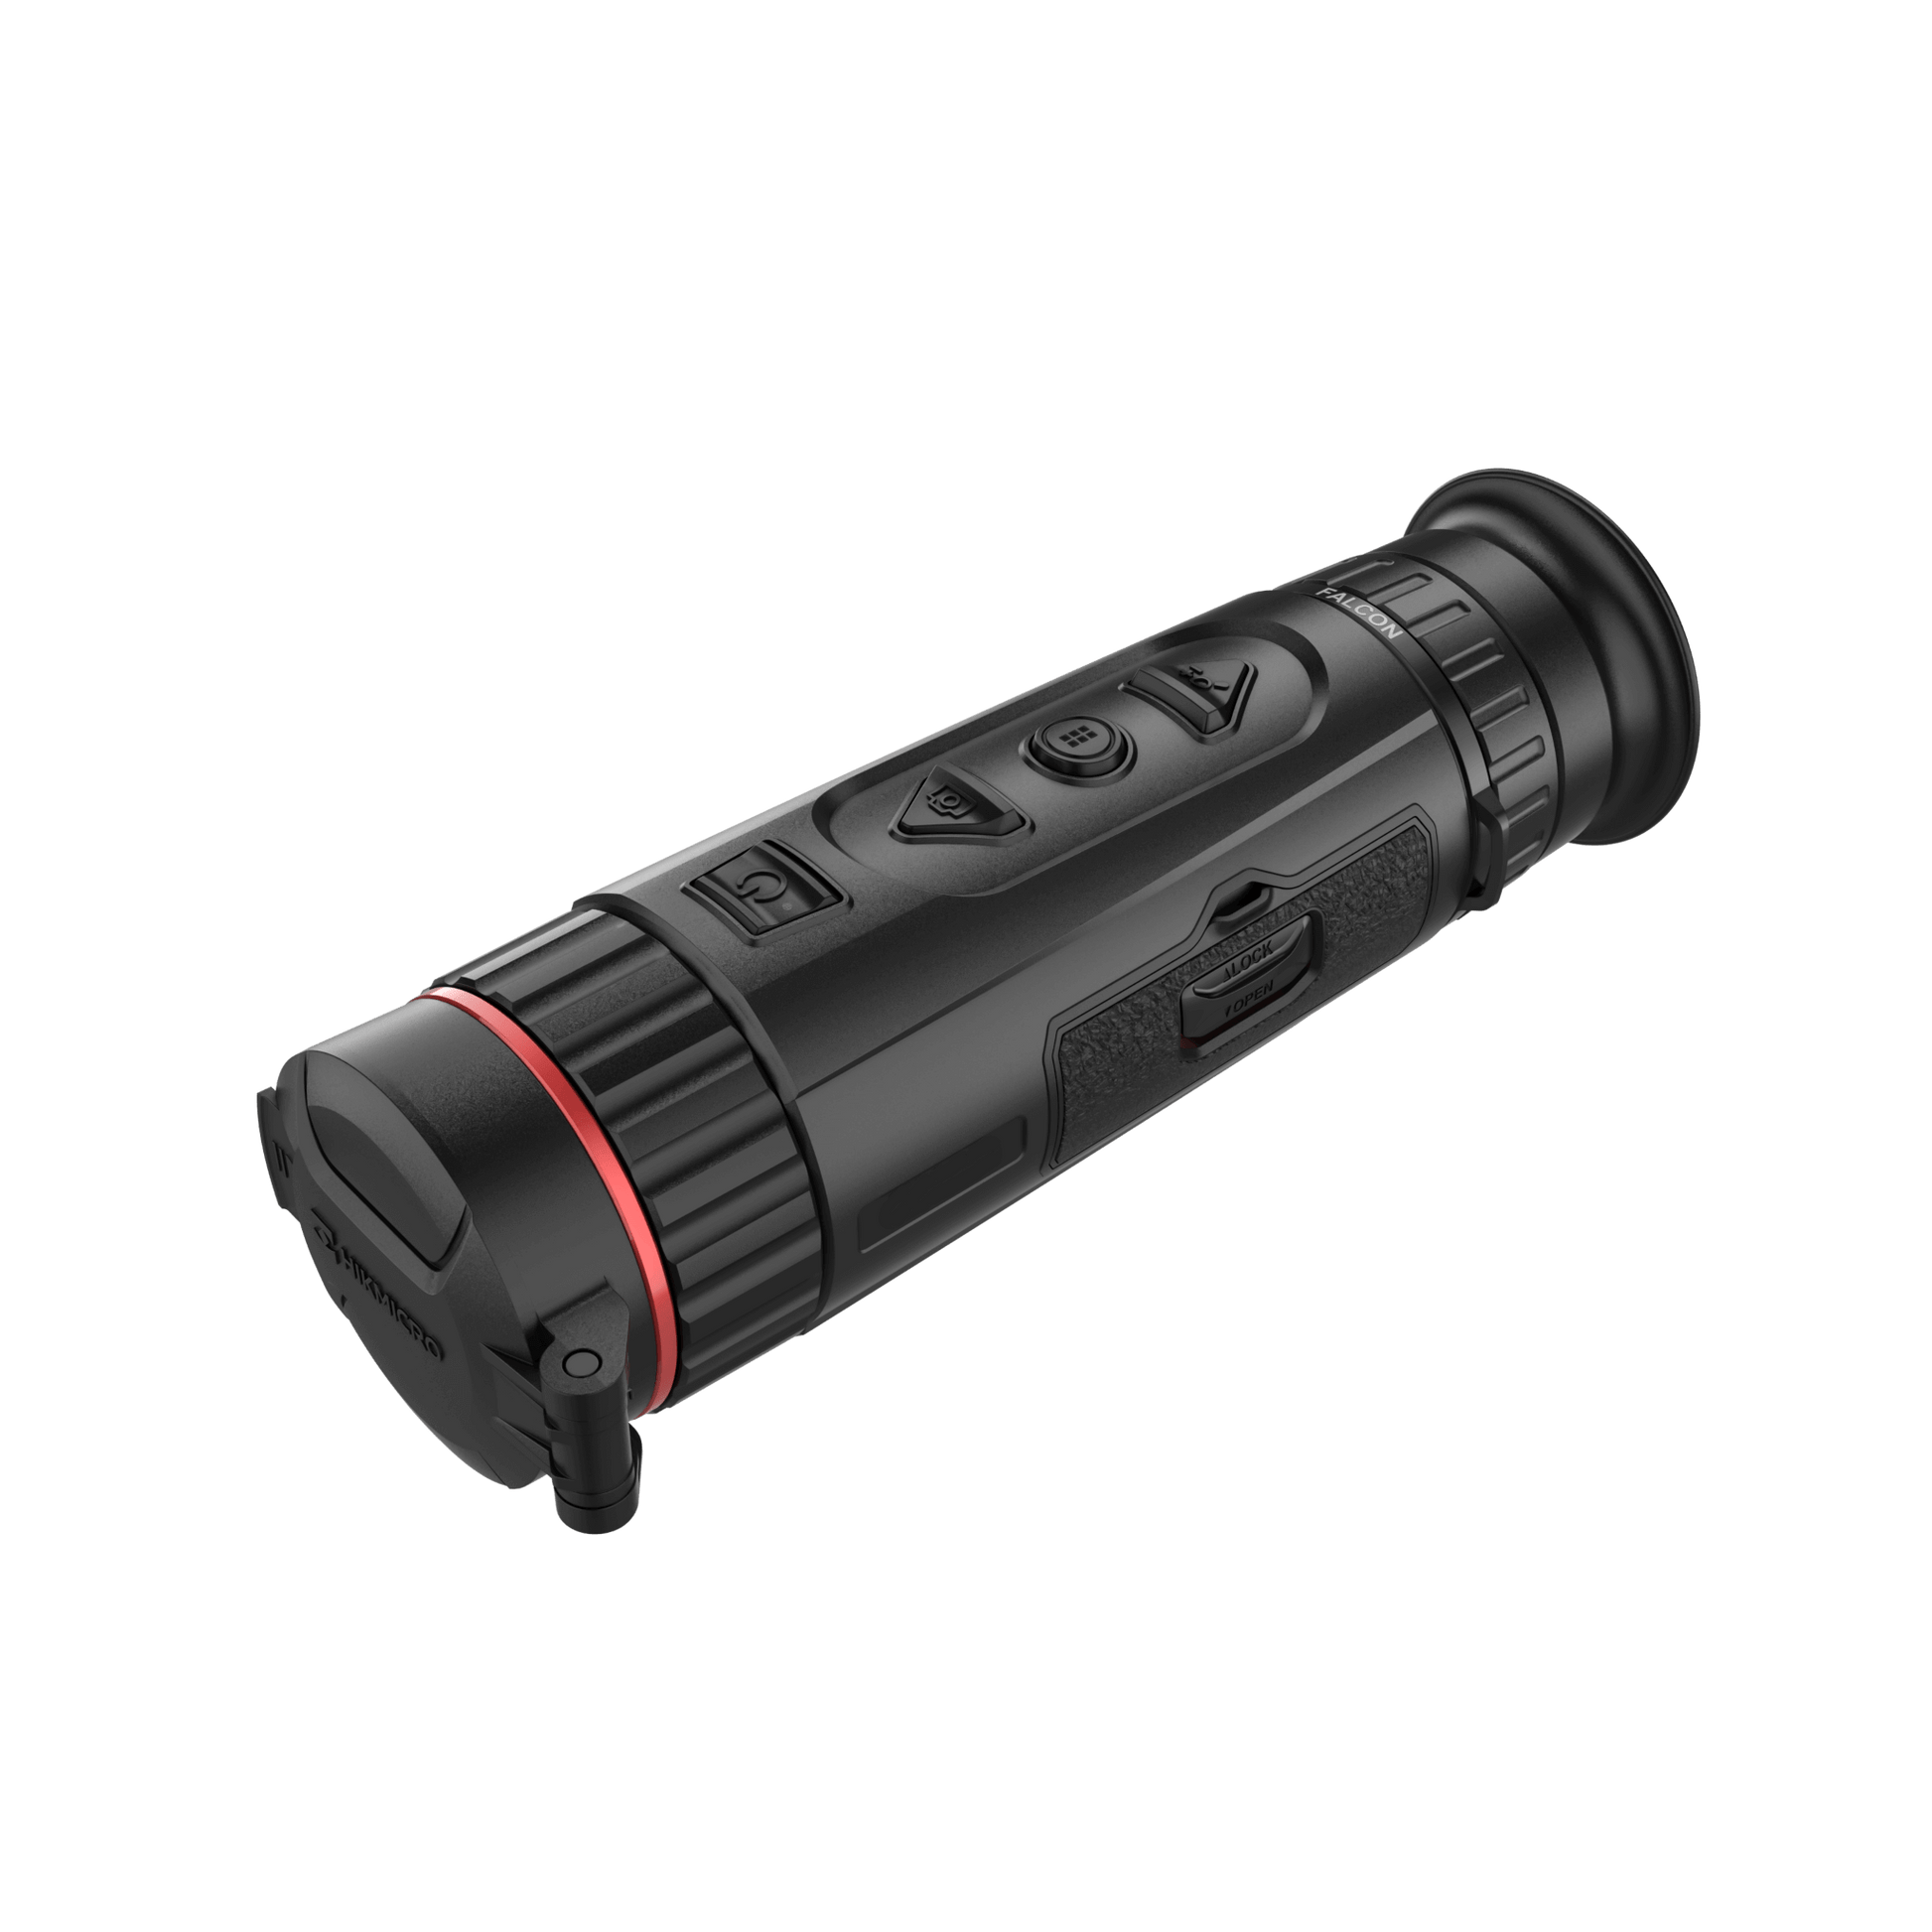 HikMicro Thermal Imaging Monocular for Sale - HikMicro Falcon Series FQ35 - HM-TS46-35XG_W-FQ35 - Top Front Left View